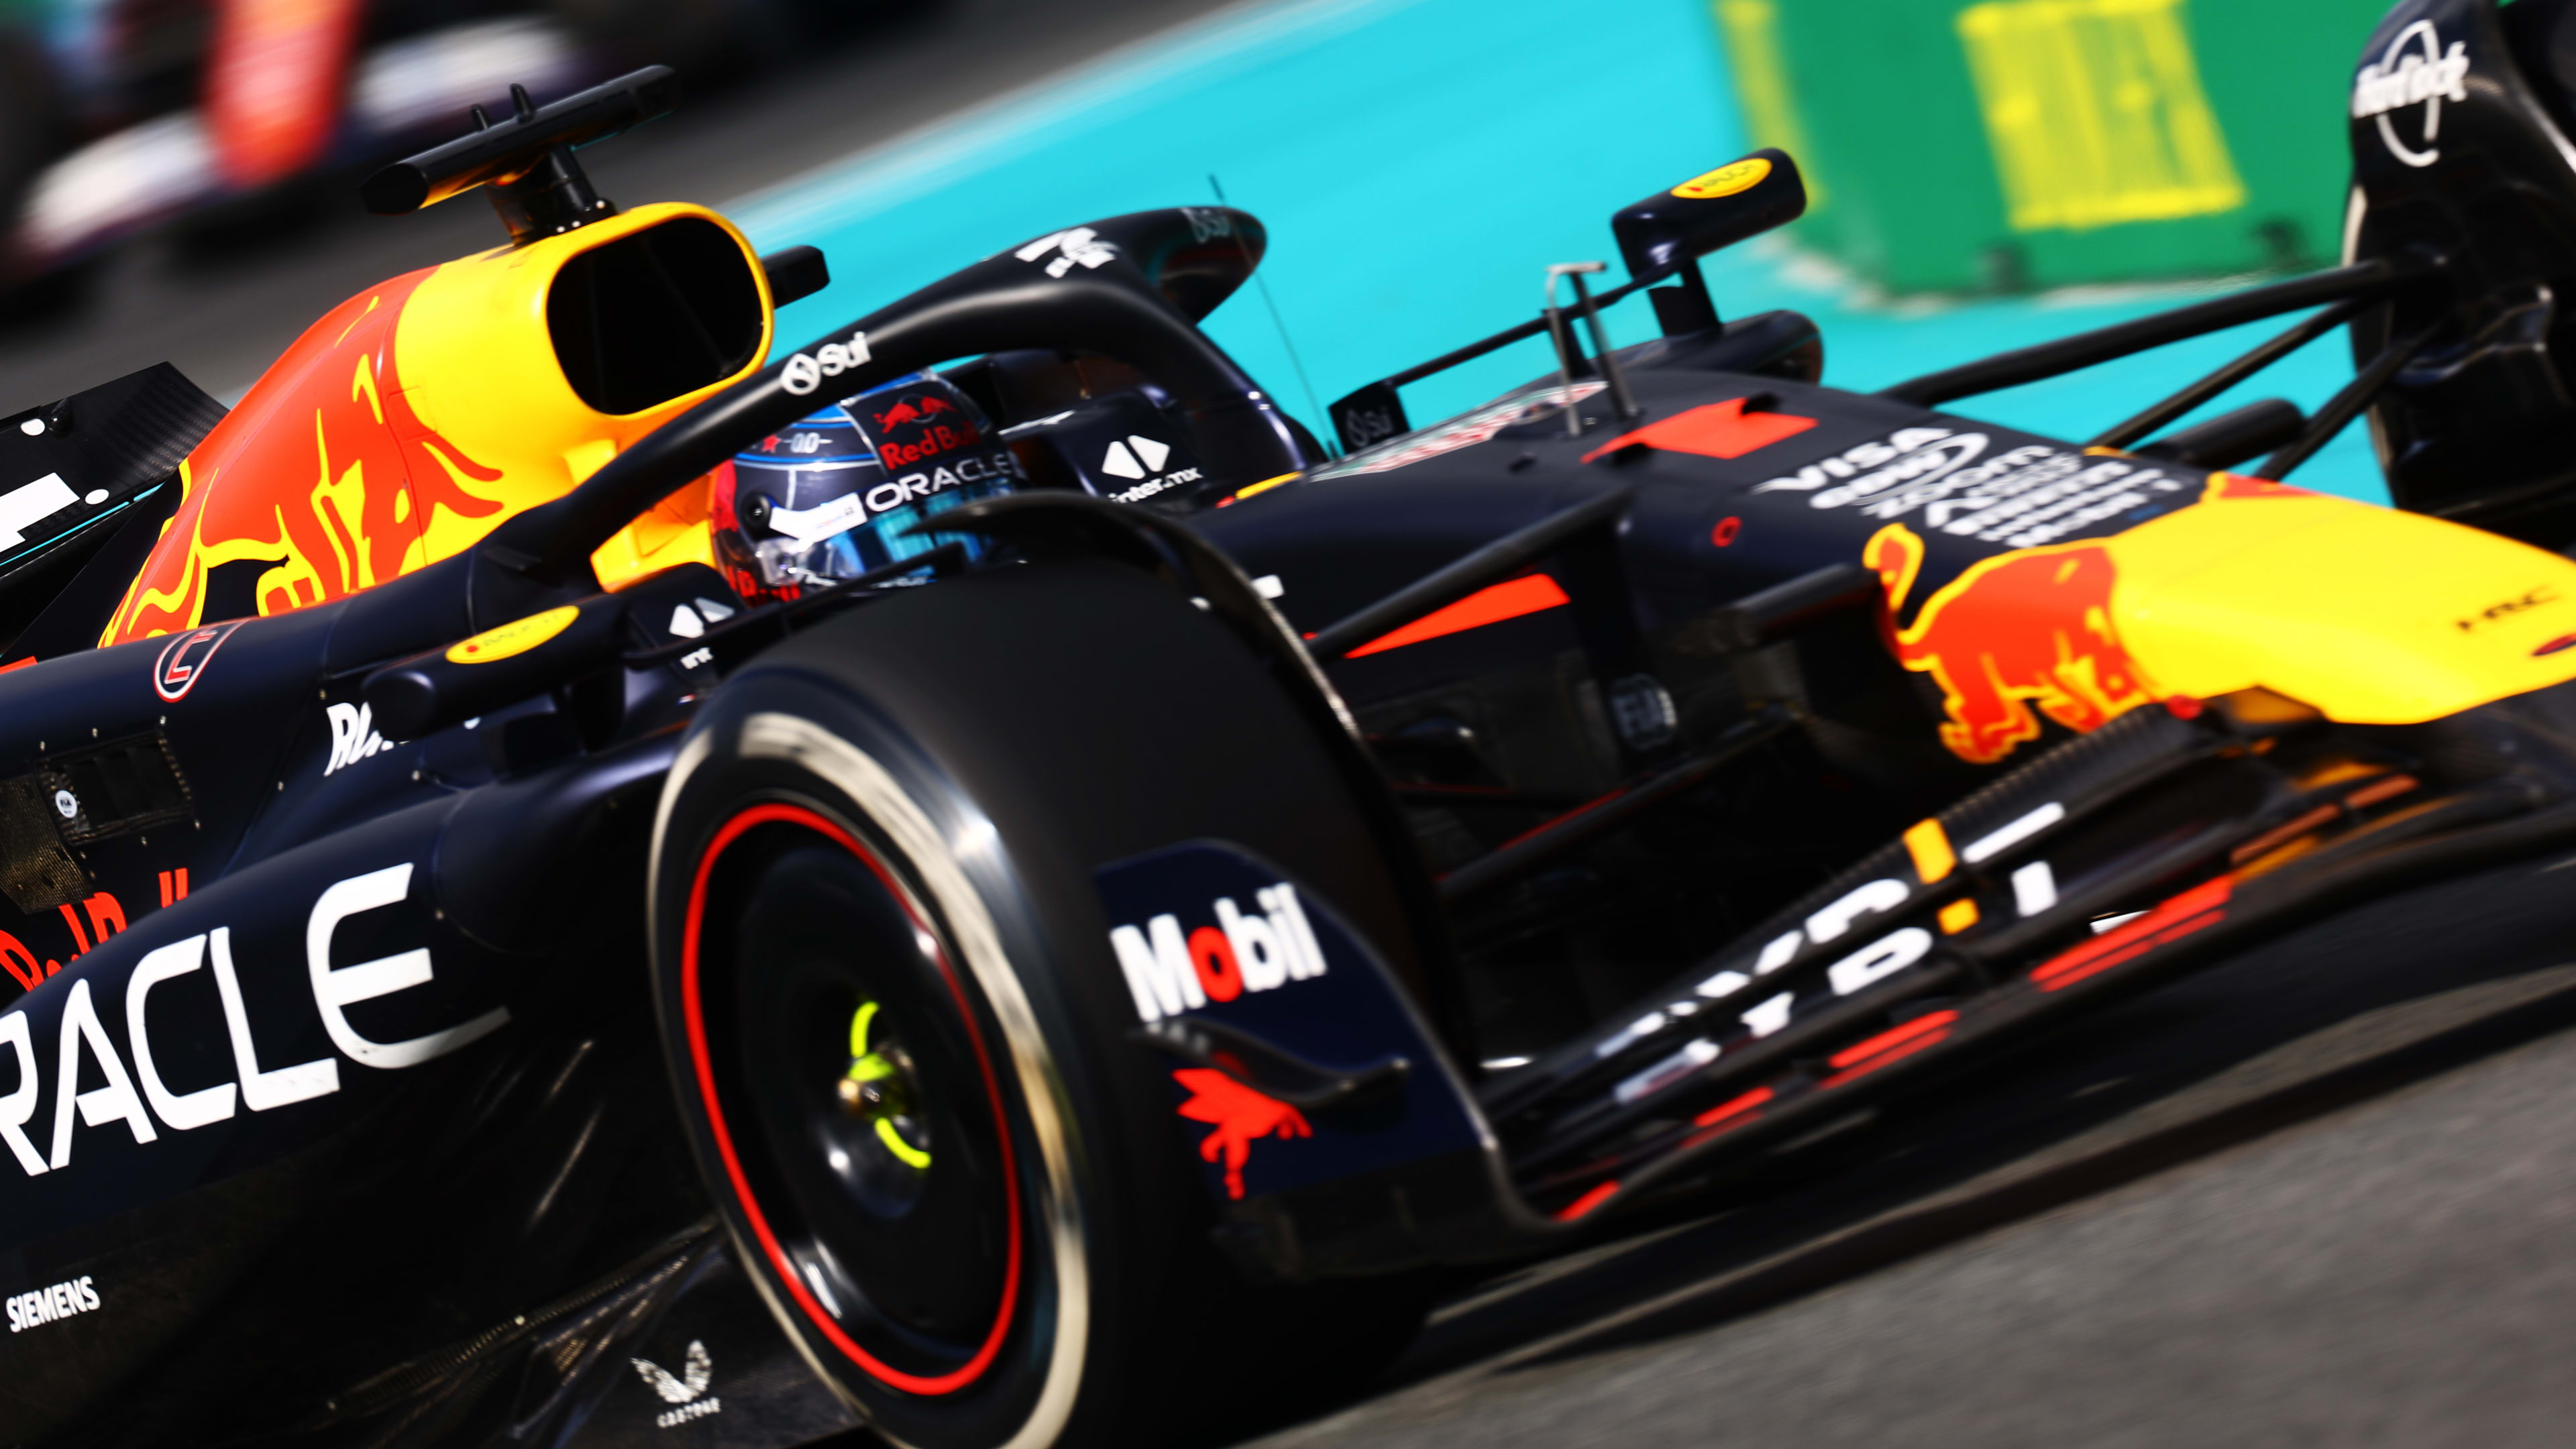 Horner says Verstappen picked up ‘a lot of damage’ after hitting bollard in Miami GP